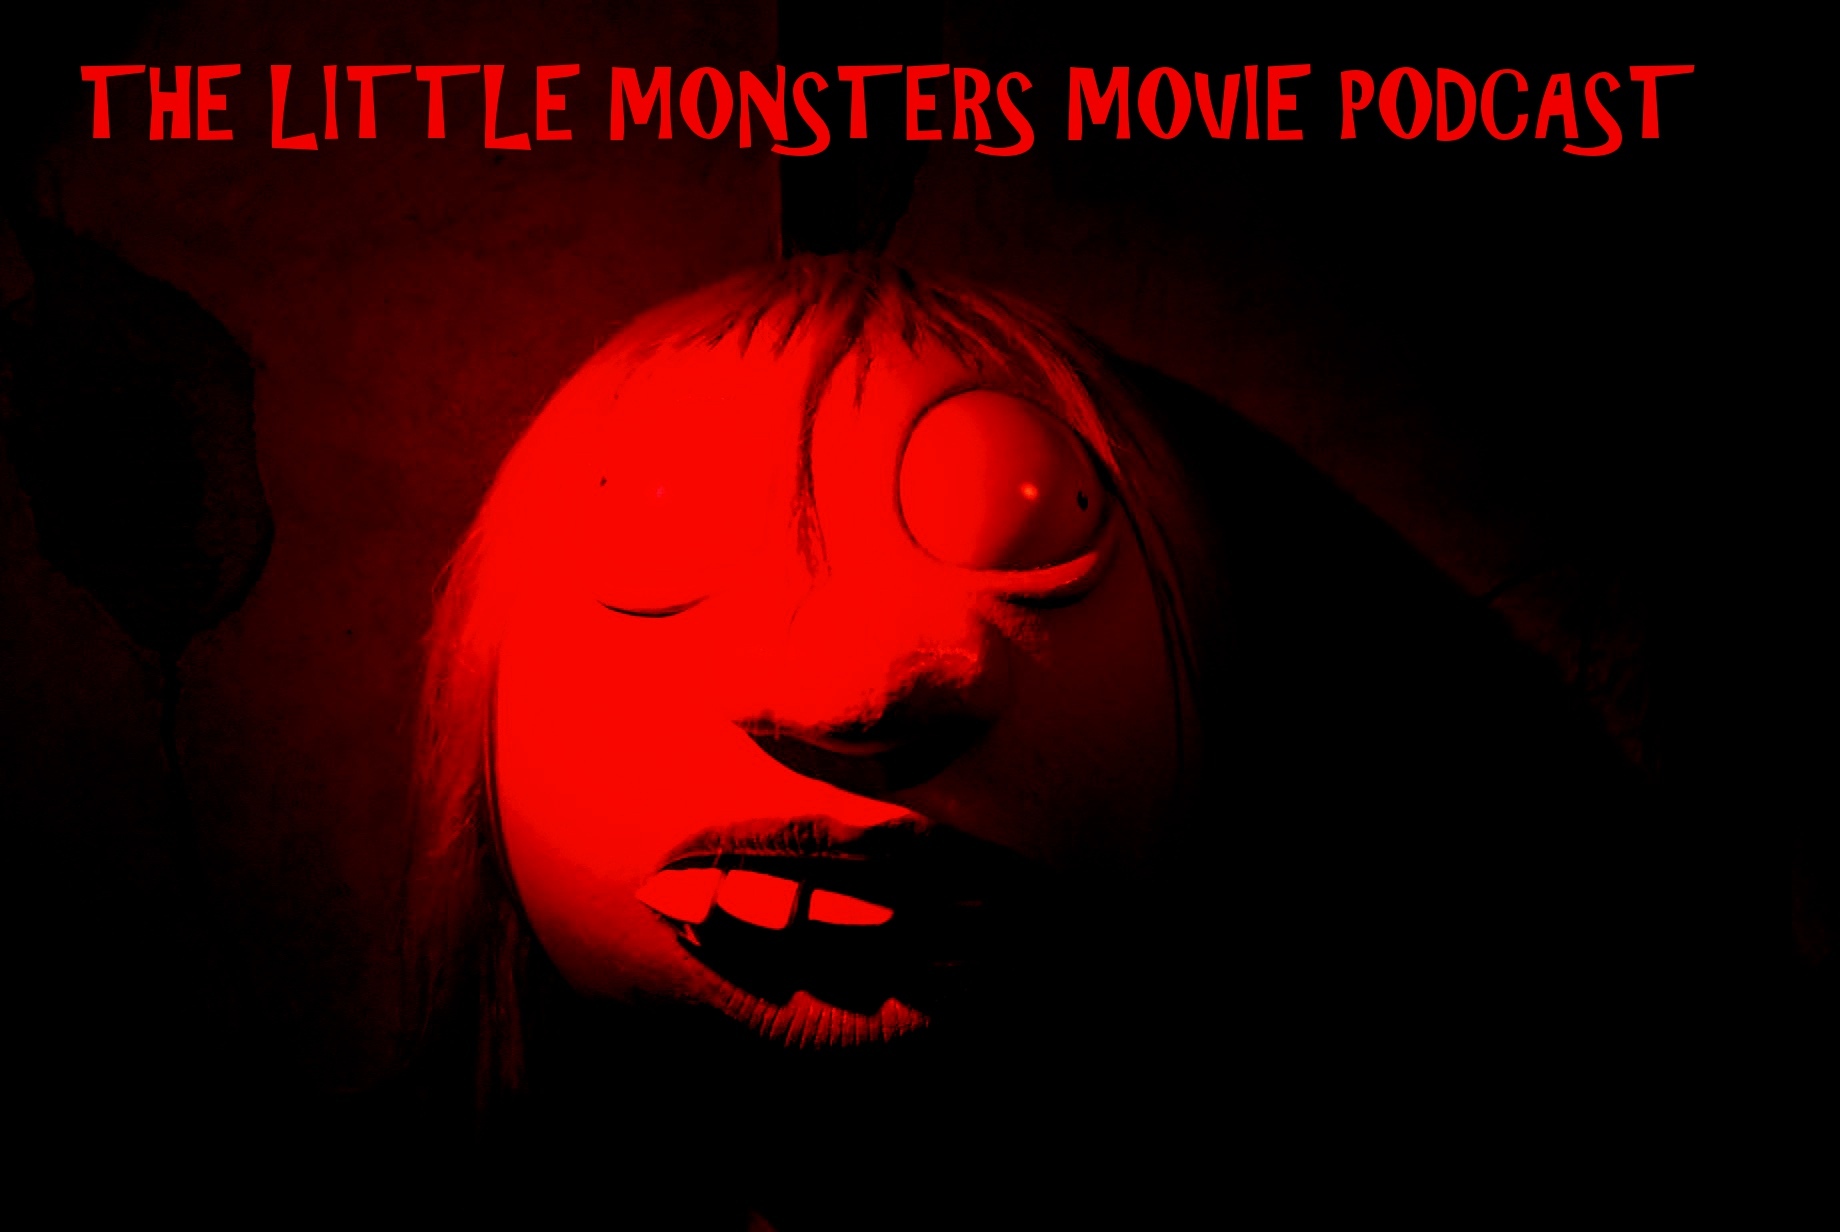 THE LITTLE MONSTERS TALK THE BLOB 1988 KEVIN DILLON SHAWNEE SMITH CULT CLASSIC MOVIE REVIEW